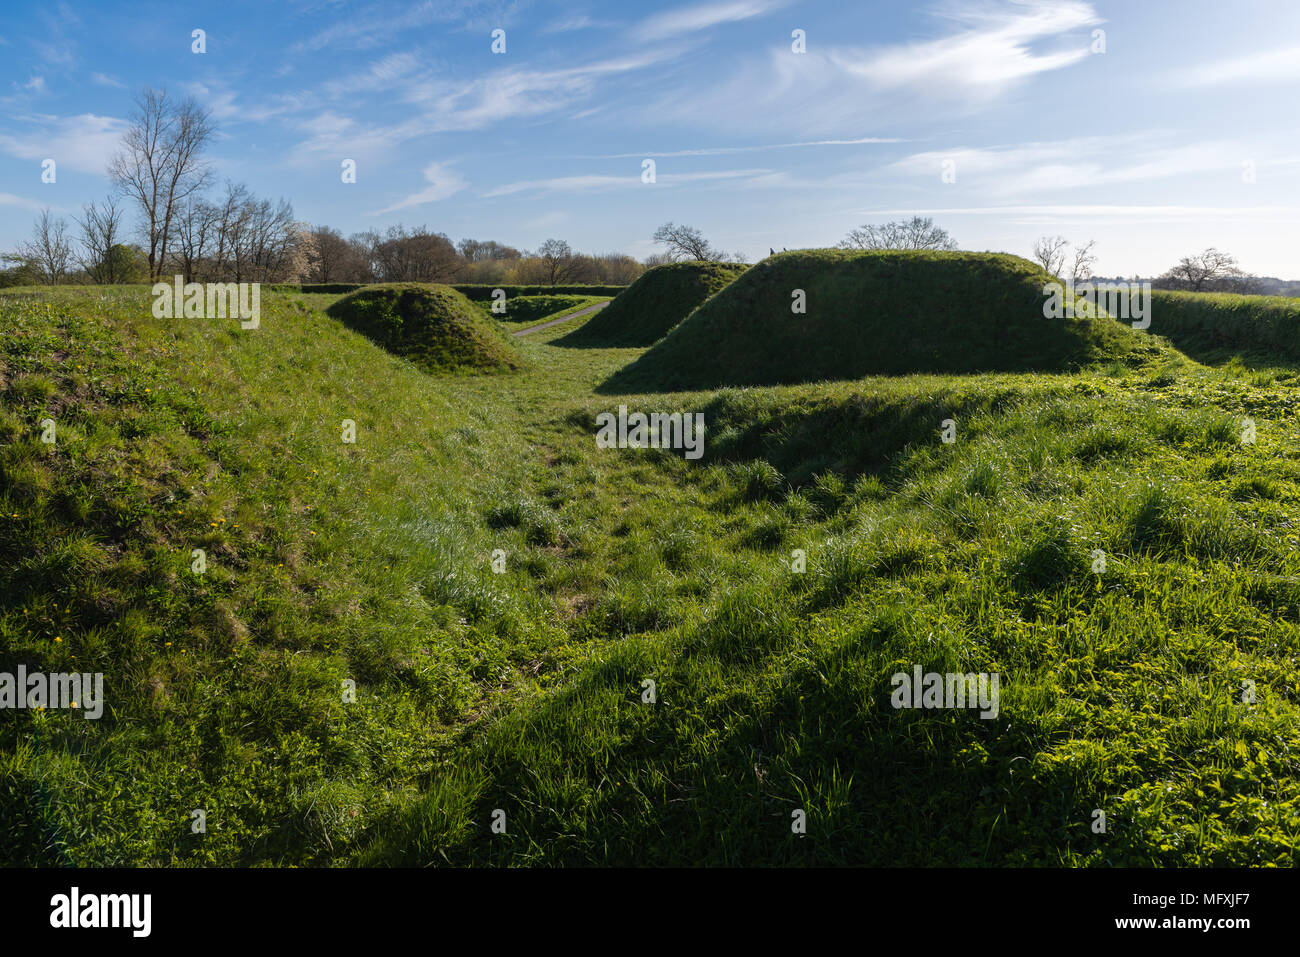 Bastion 14, a modified construction of the medieval Danevirke or Daneverk for the German - Danish war of 1864, Dannewerk, Schleswig, Germany, Europe Stock Photo